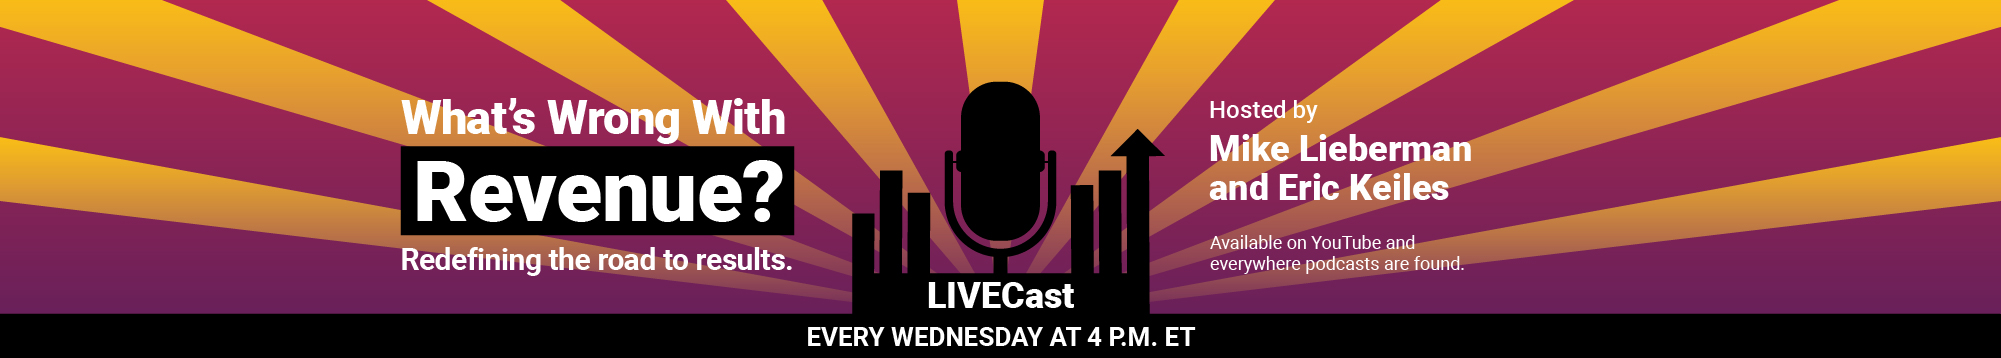 LIVECast: What's Wrong With Revenue?